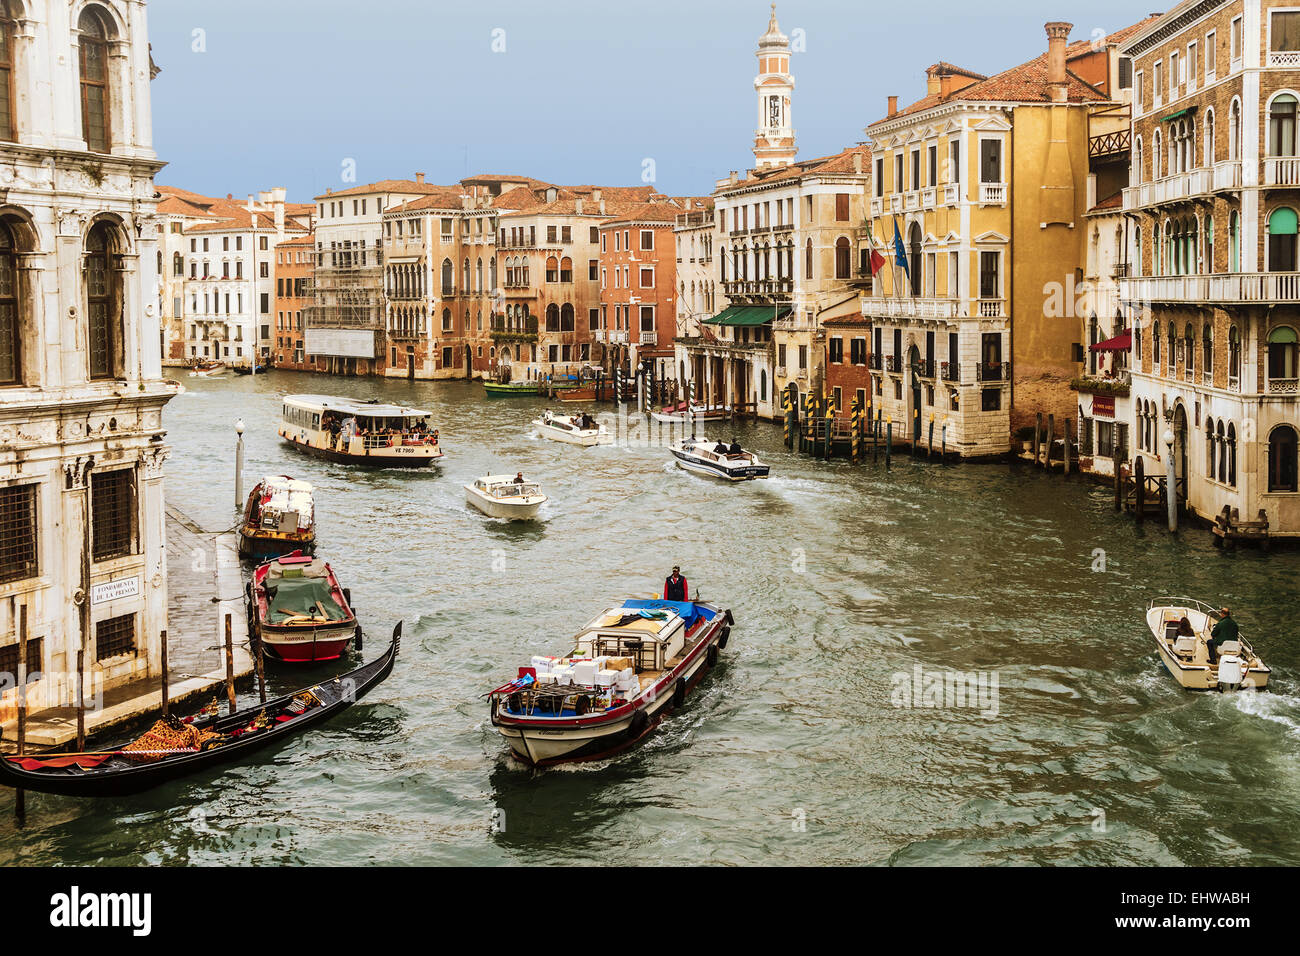 Busy Time On The Grand Canal Venice Italy Stock Photo